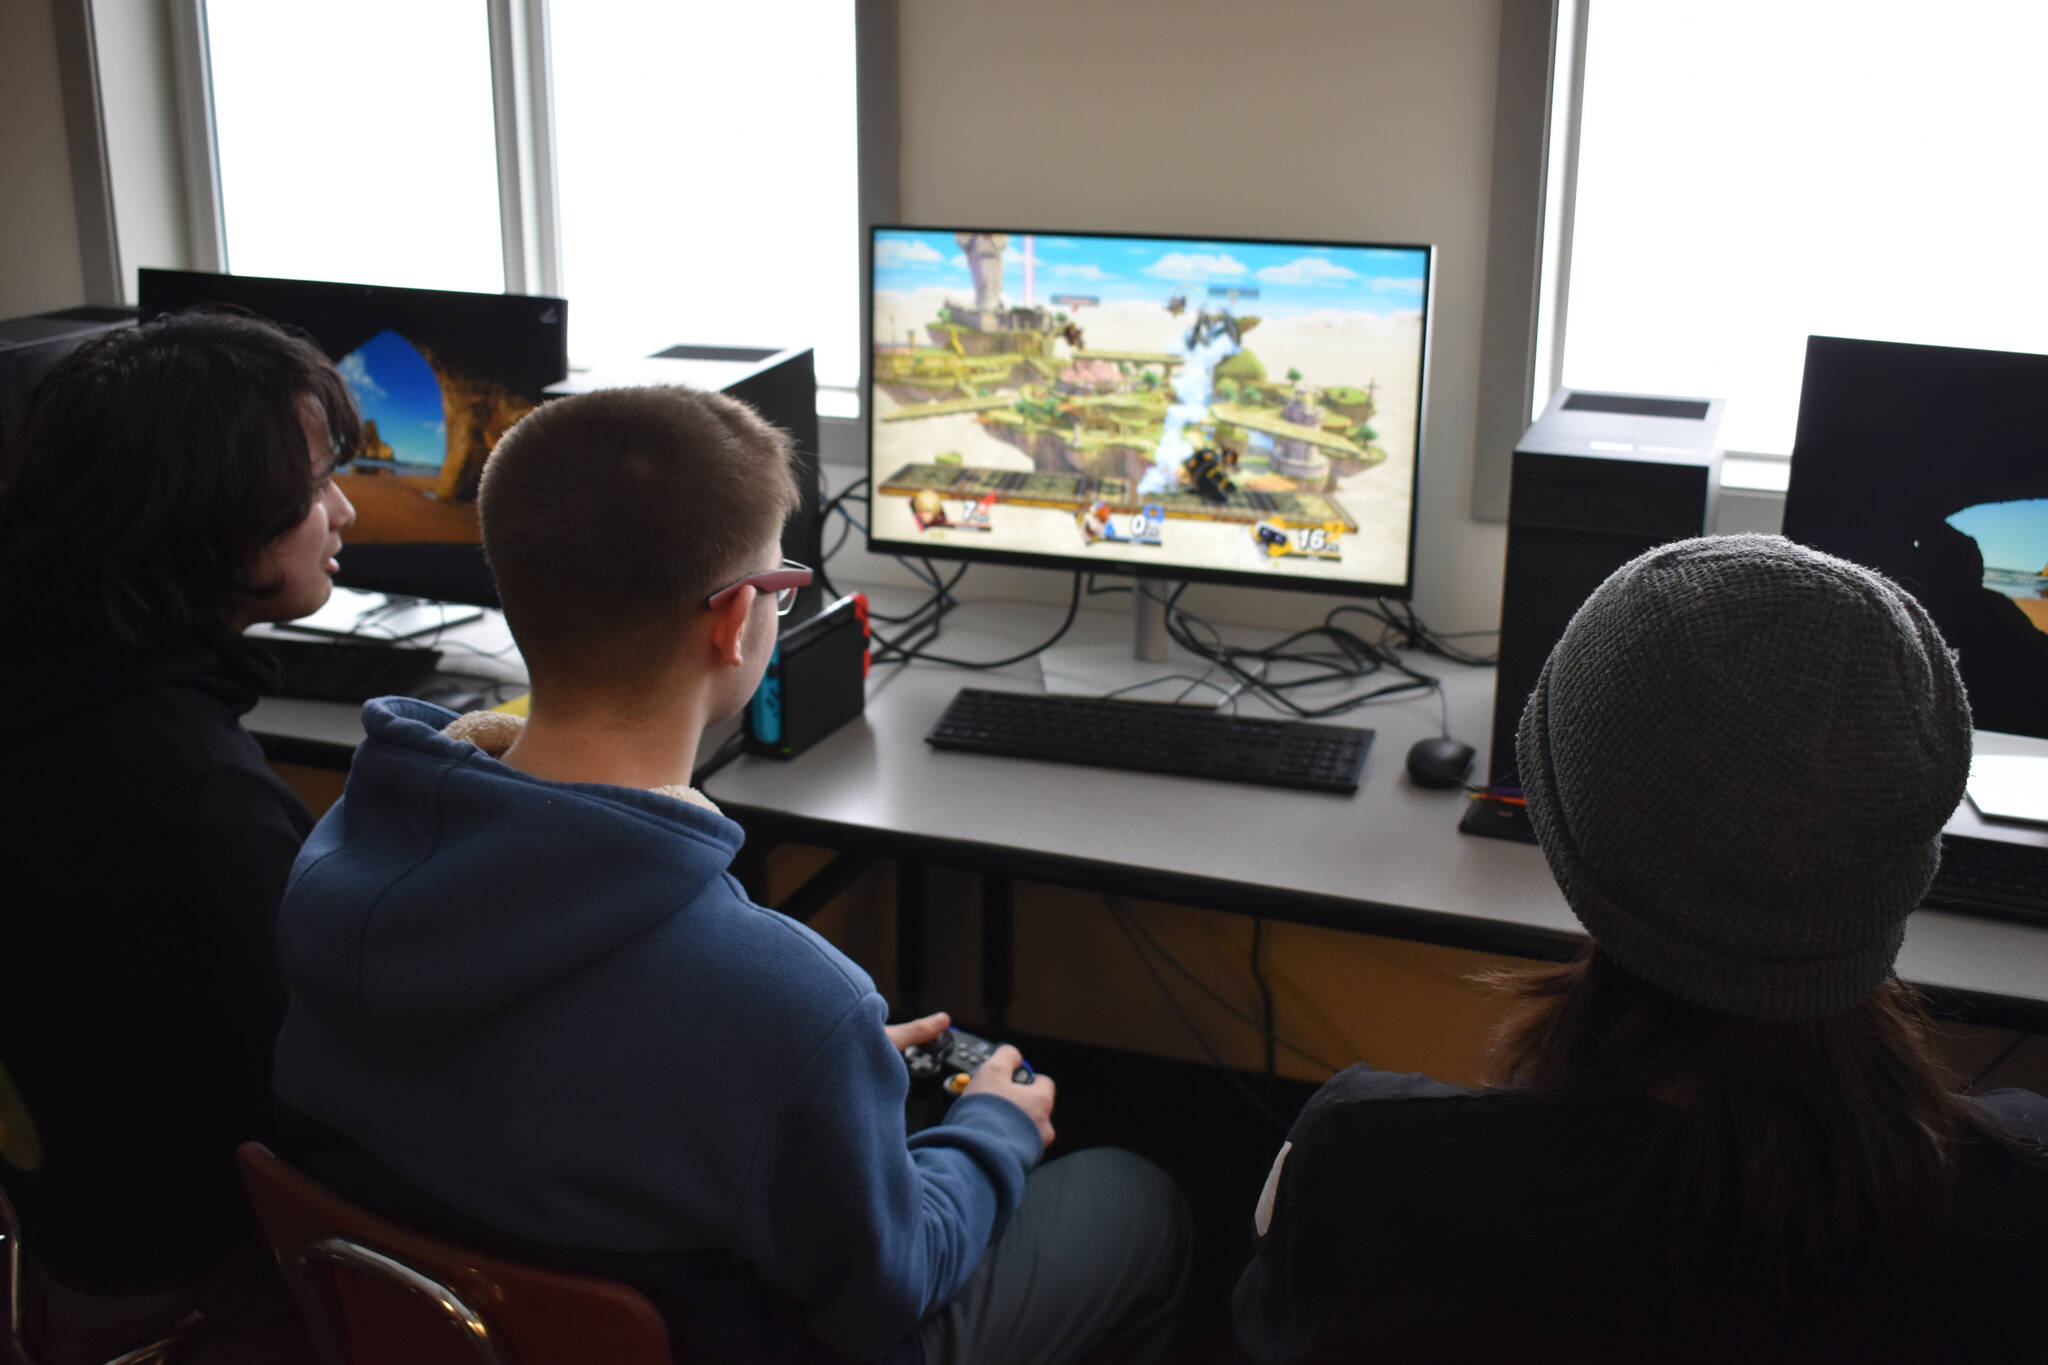 Eli Castro, Blake Gillis and Kaizen Fuller participate in a practice battle ahead of a scheduled game of Super Smash Bros. Ultimate at Kenai Central High School in Kenai, Alaska, on Wednesday, Feb. 15, 2023. (Jake Dye/Peninsula Clarion)